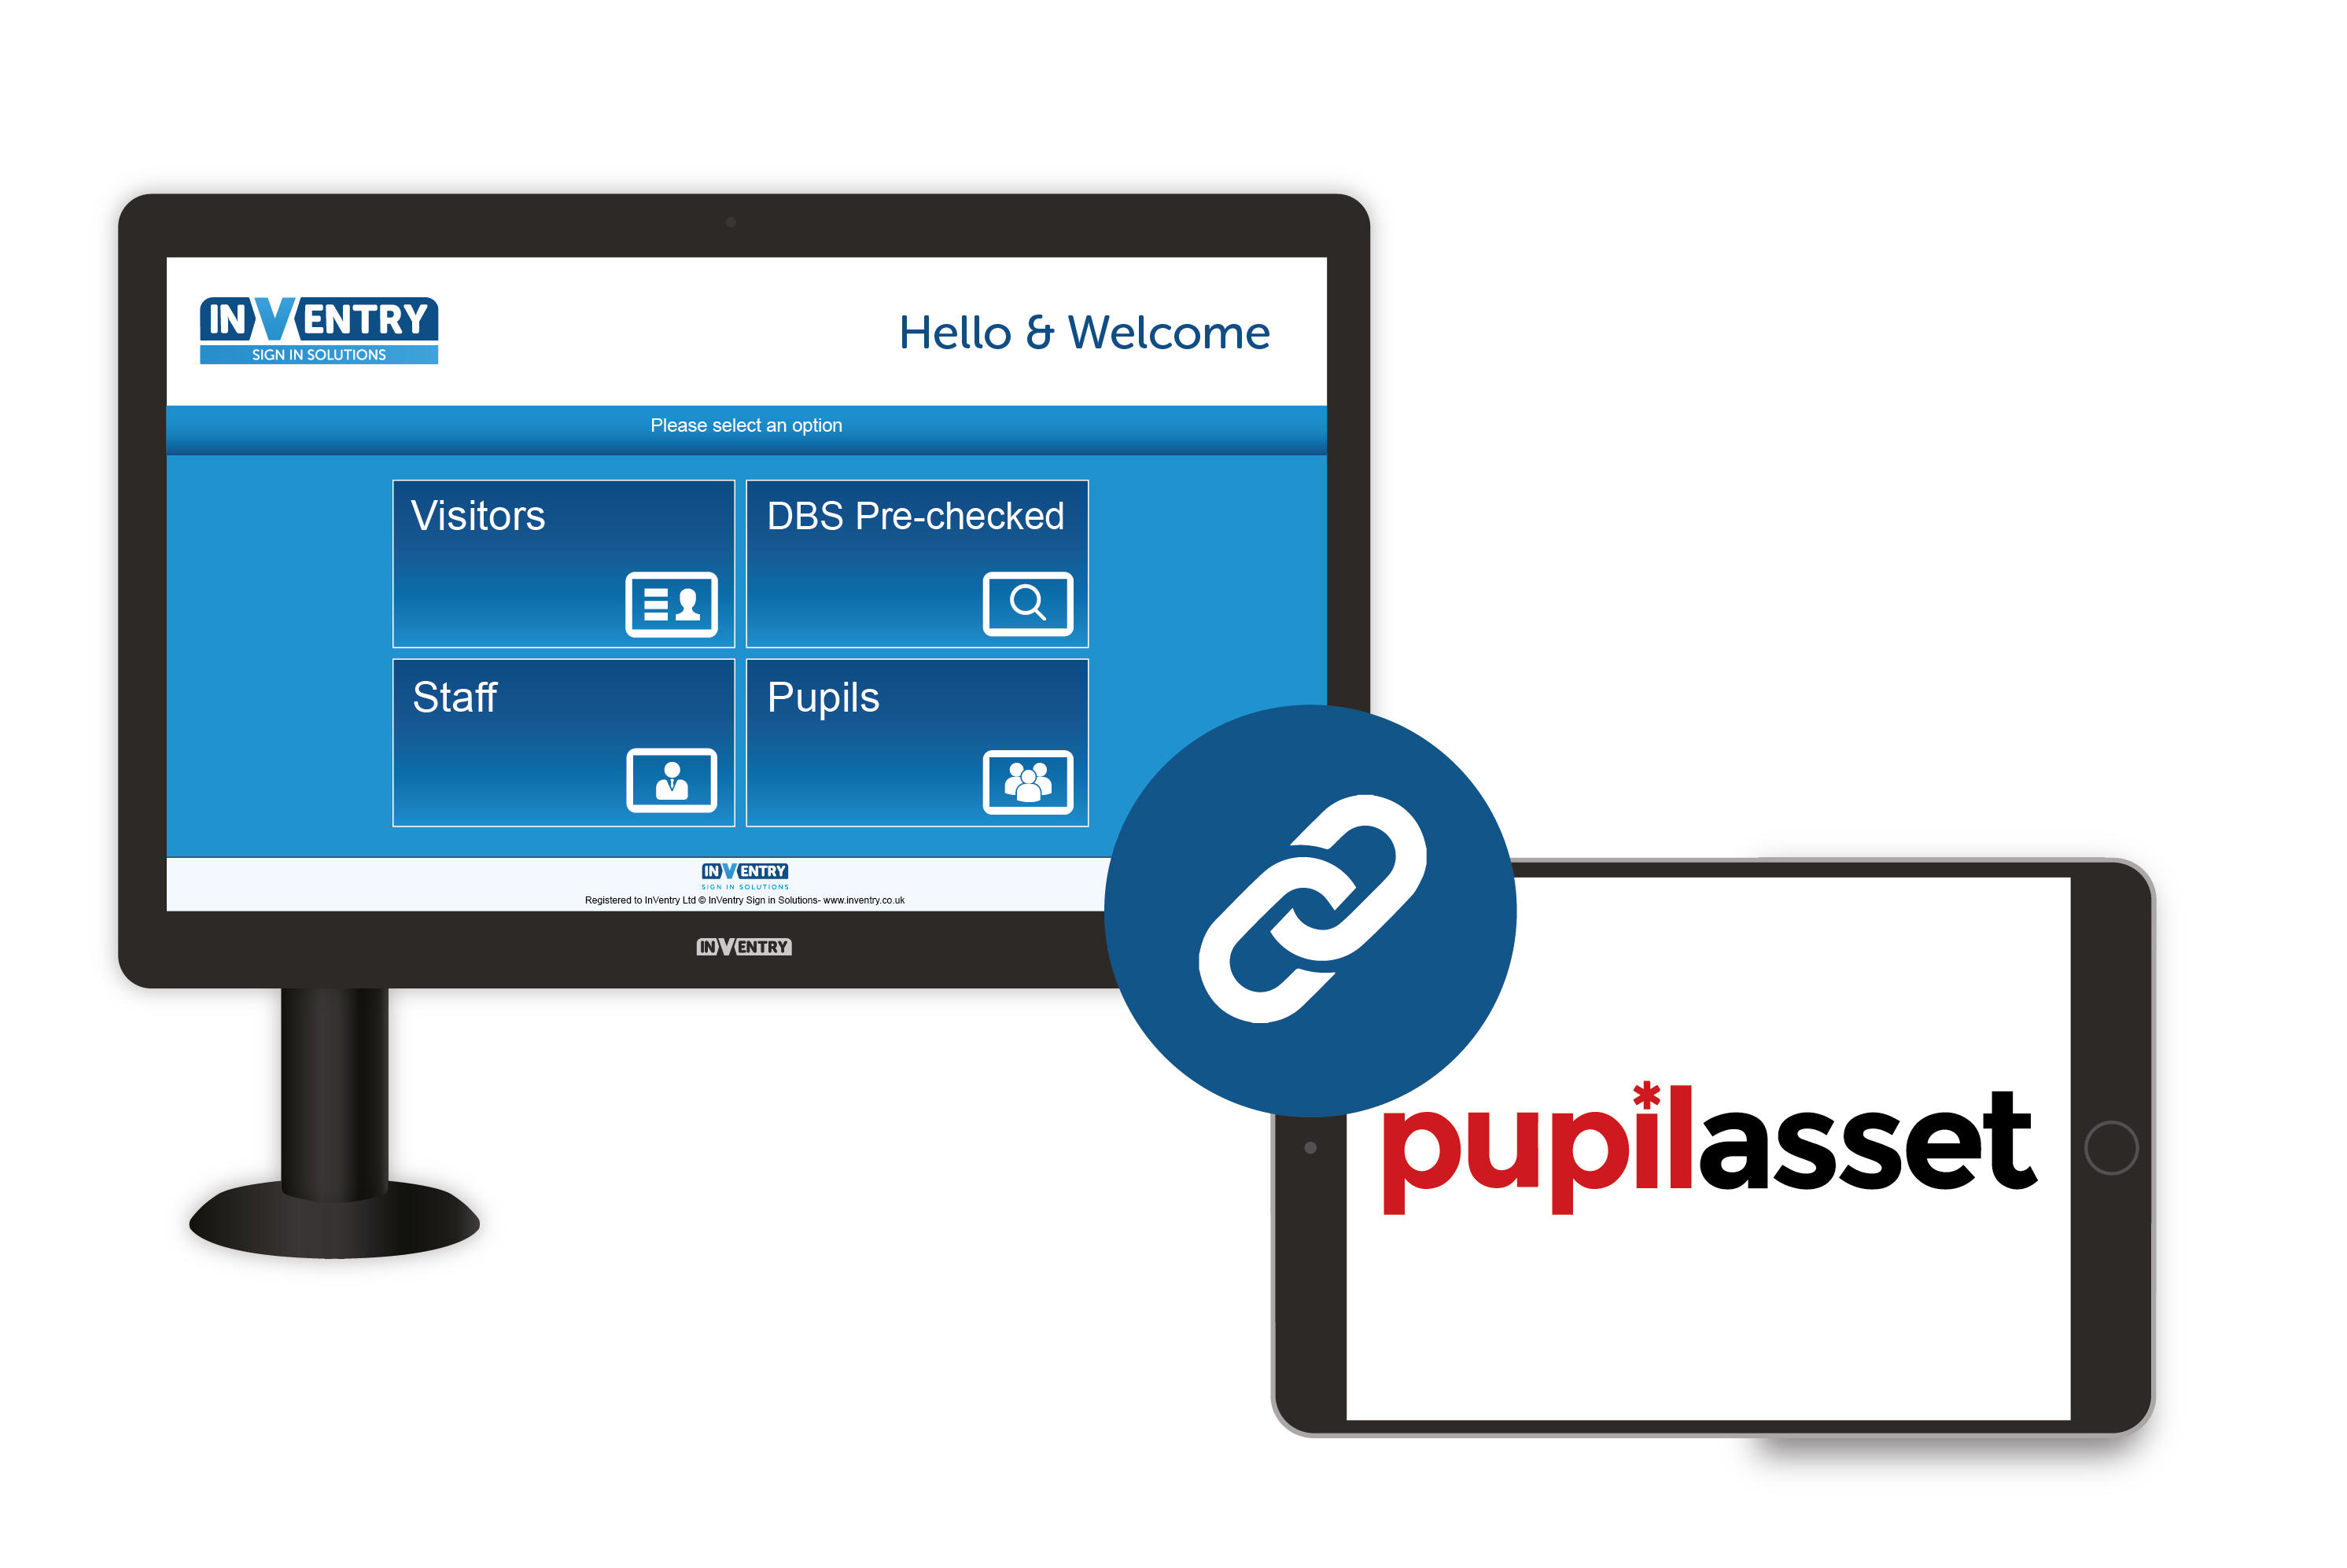 Pupil Asset and InVentry integration on devices